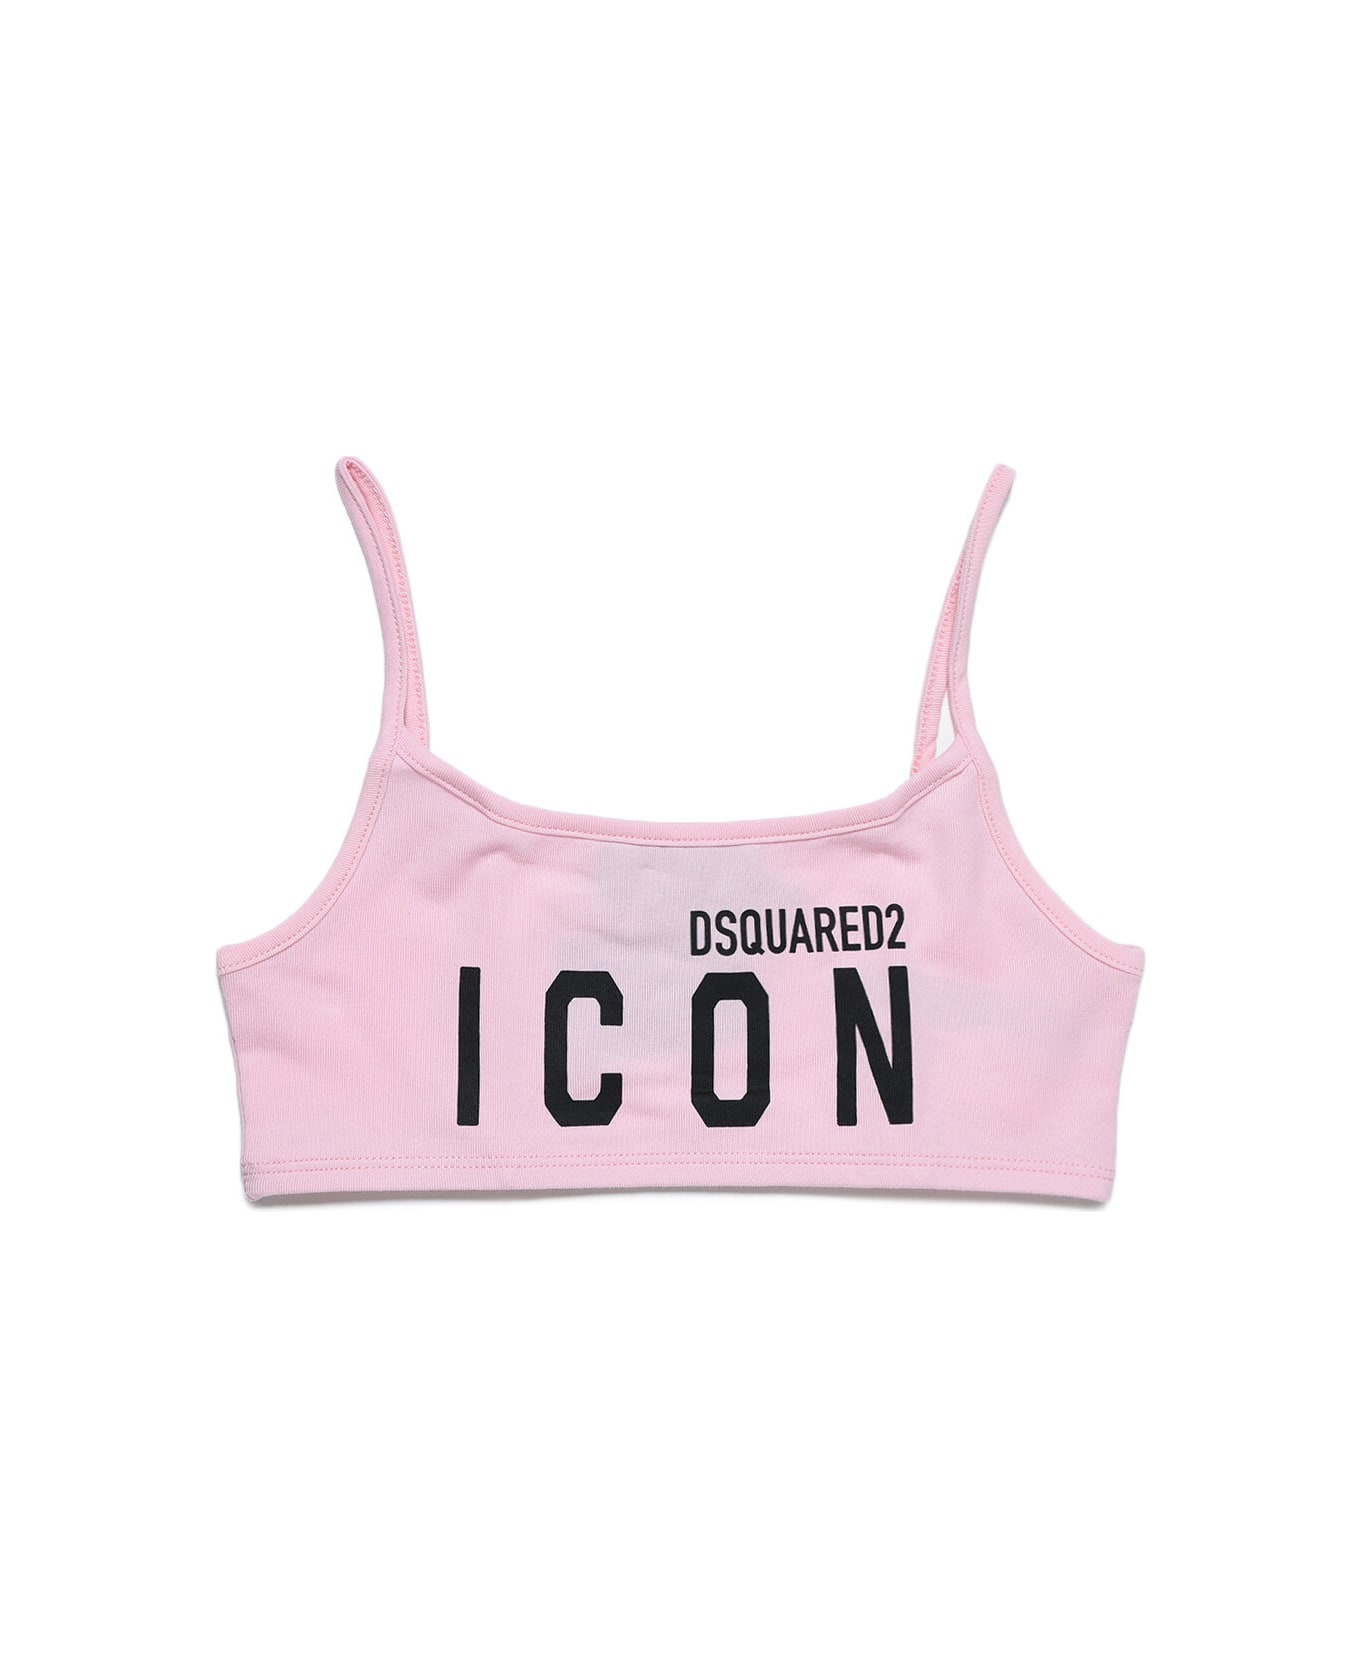 Dsquared2 D2ub3f-icon Und Bra Dsquared - Orchid pink